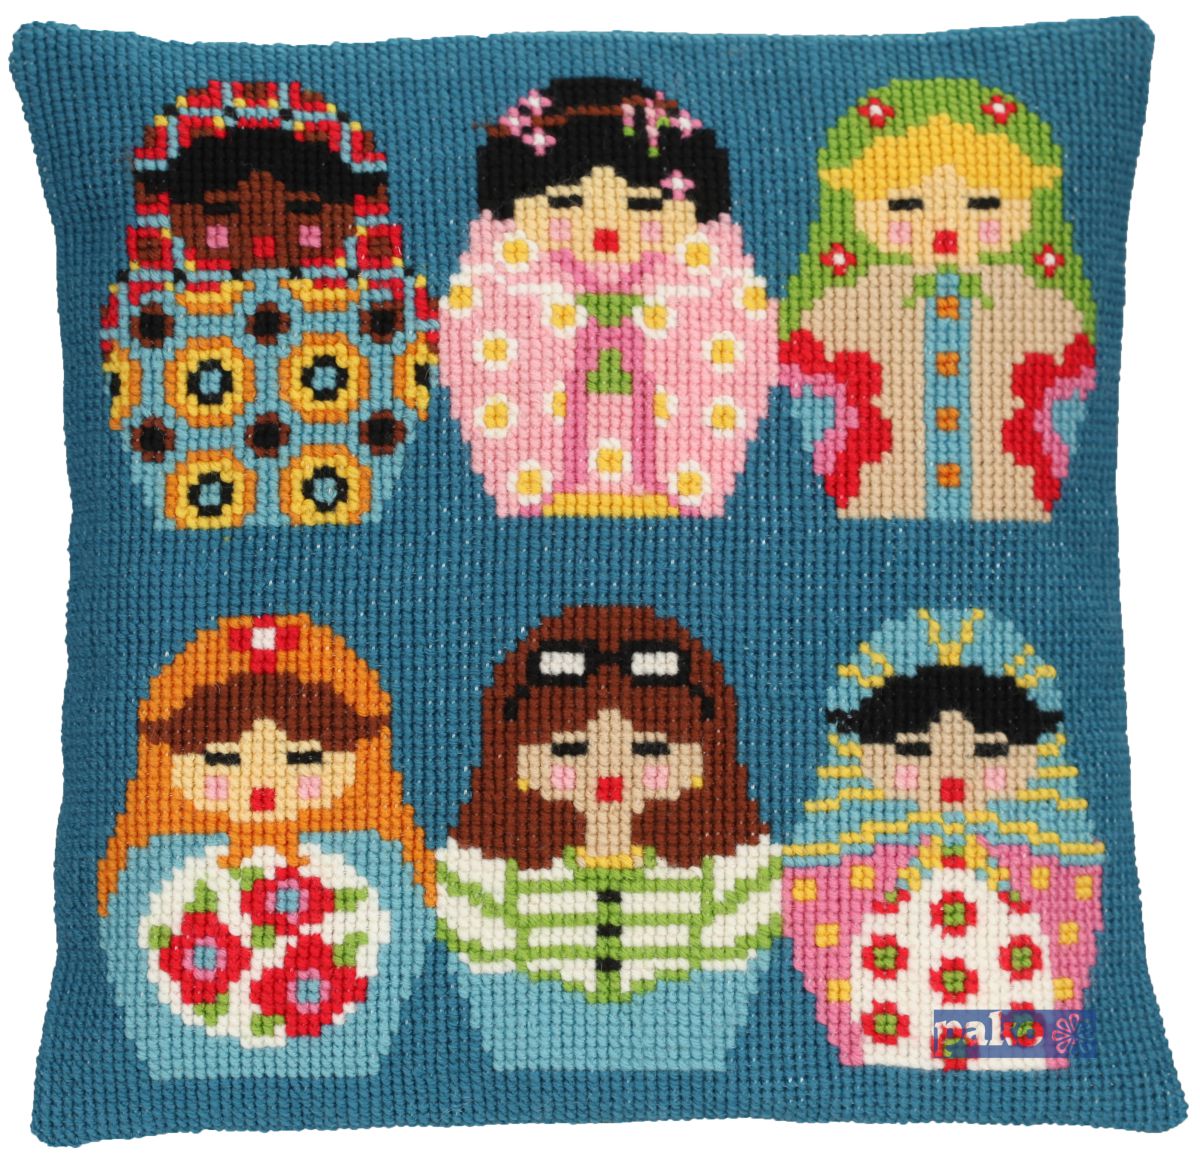 diy embroidery kit cross stitch wool cushion lucky dolls printed